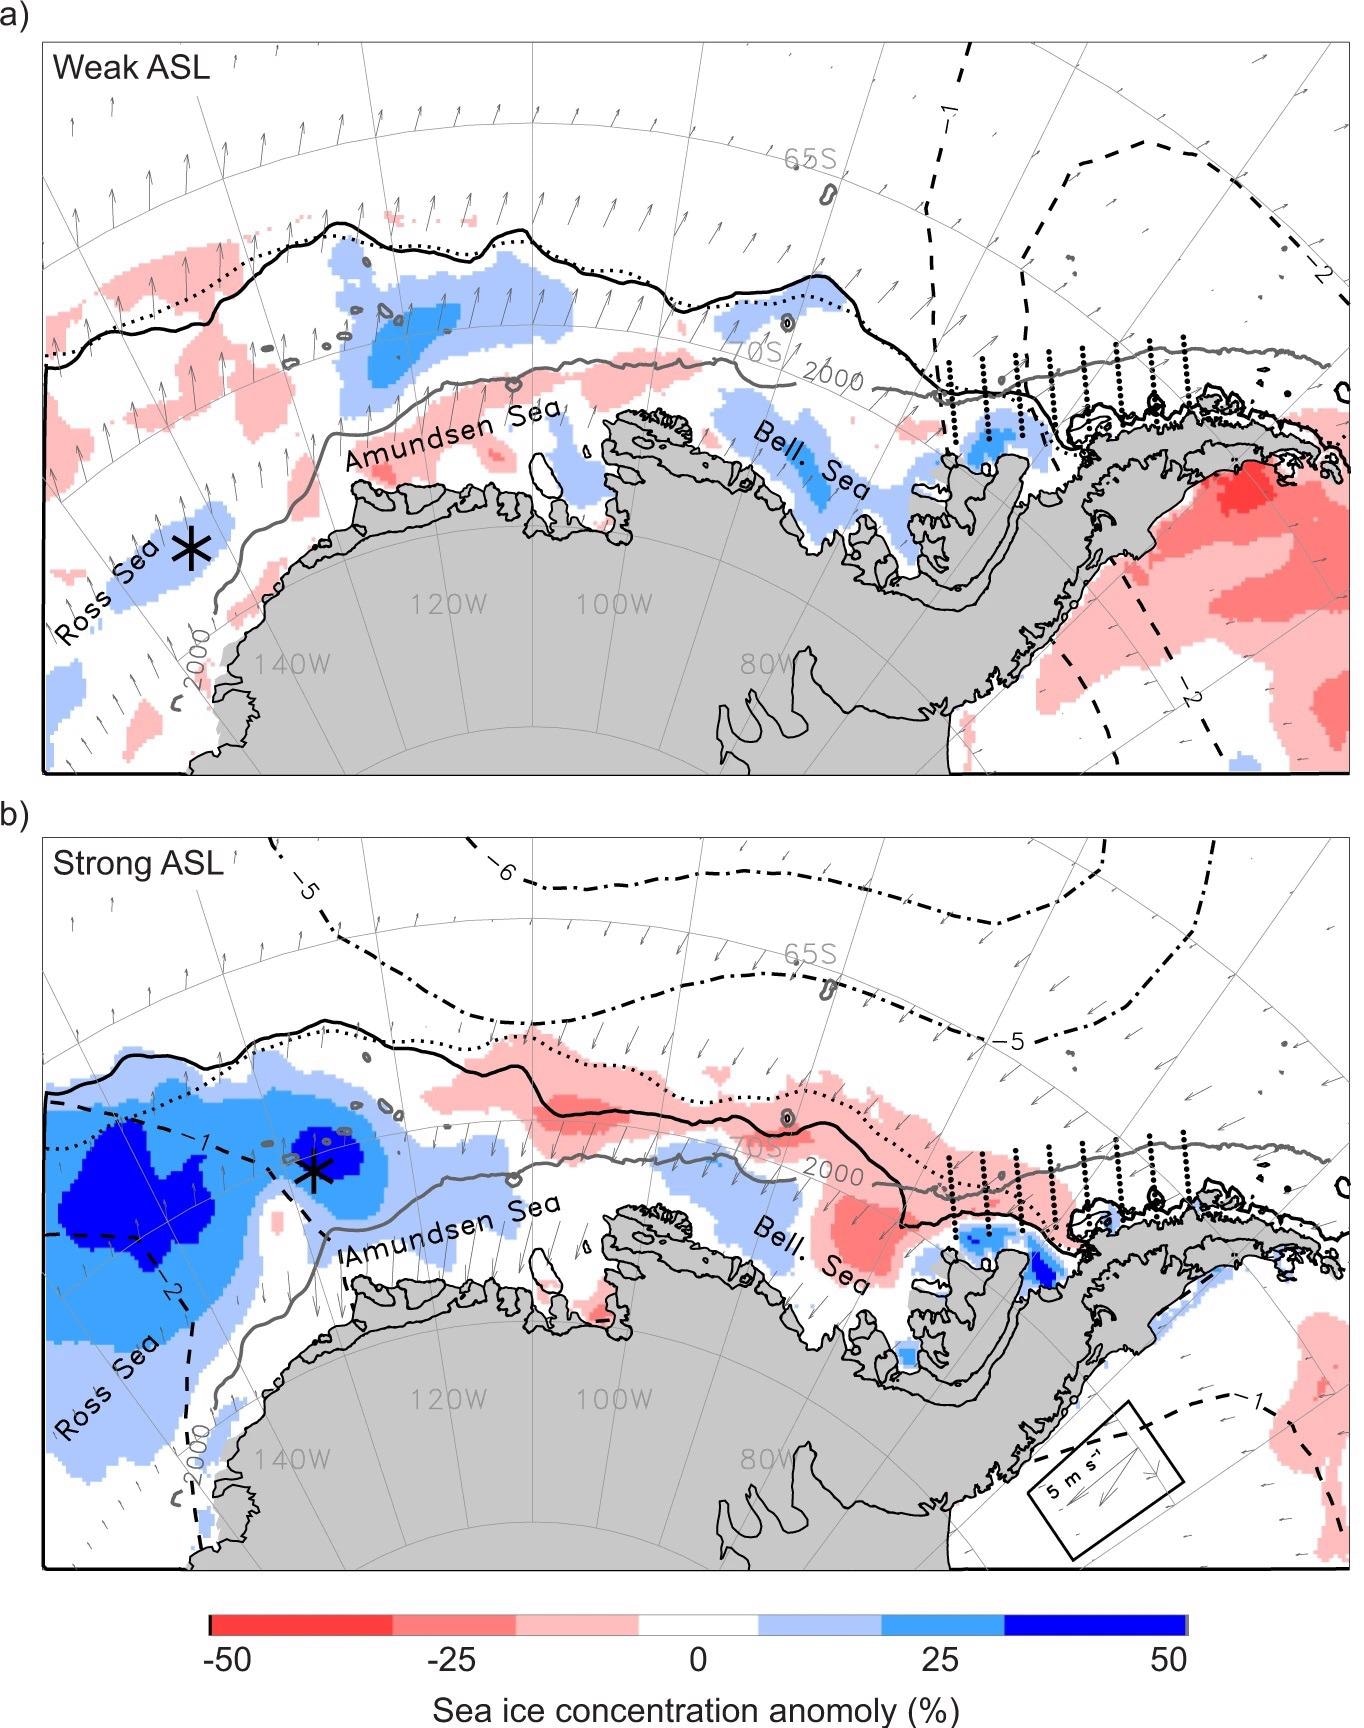 Impact of the Amundsen Sea Low (ASL) on the West Antarctic environment. (a) Averaged environmental conditions for the duration of an especially weak (shallow; relative central pressure, RCP, of -6) ASL event during March–April–May (MAM) 1993. The ASL central location is marked by the black asterisk and the Palmer Antarctica Long-Term Ecological Research program study region and sampling stations are depicted by eight lines of small black dots. Sea ice concentration anomalies are color shaded and the MAM 1993 mean ice edge contour (solid black line) and long-term (1979–2019) mean contour (dotted black line) are also marked. Subsampled wind anomalies are shown in vector format. The negative sea-level pressure (SLP) anomalies are shown for the most negative feature during MAM 1993 (dashed concentric contours). (b) The same averaged environmental conditions and symbology as in (a) but for the duration of an especially strong (deep; RCP of -16) ASL event during MAM 1996. The wind-vector legend for both 1993 and 1996 is boxed in the lower right corner.